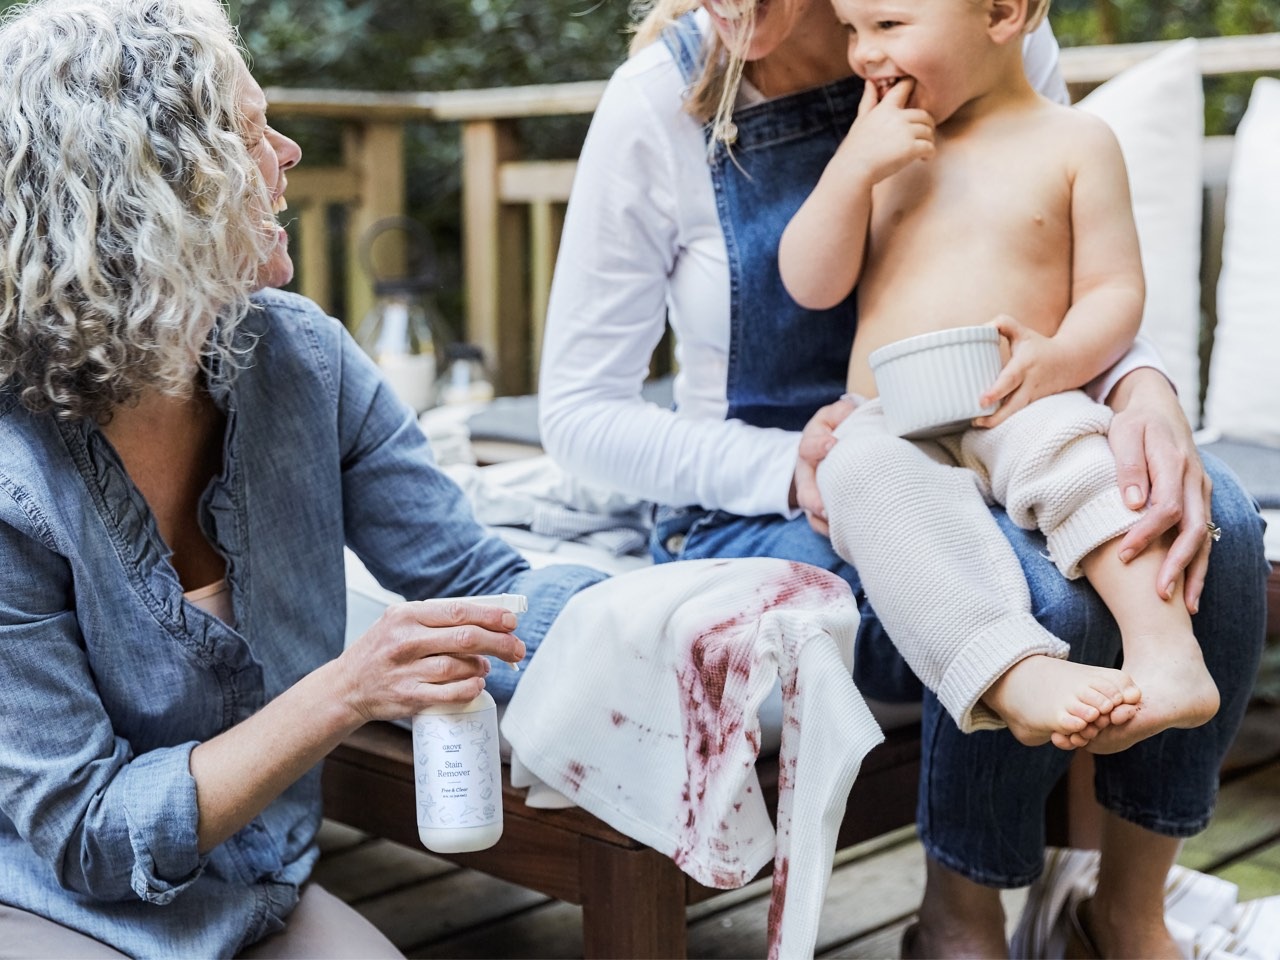 Image of older woman using Grove Stain Remover Spray on a stained white shirt looking at a young child